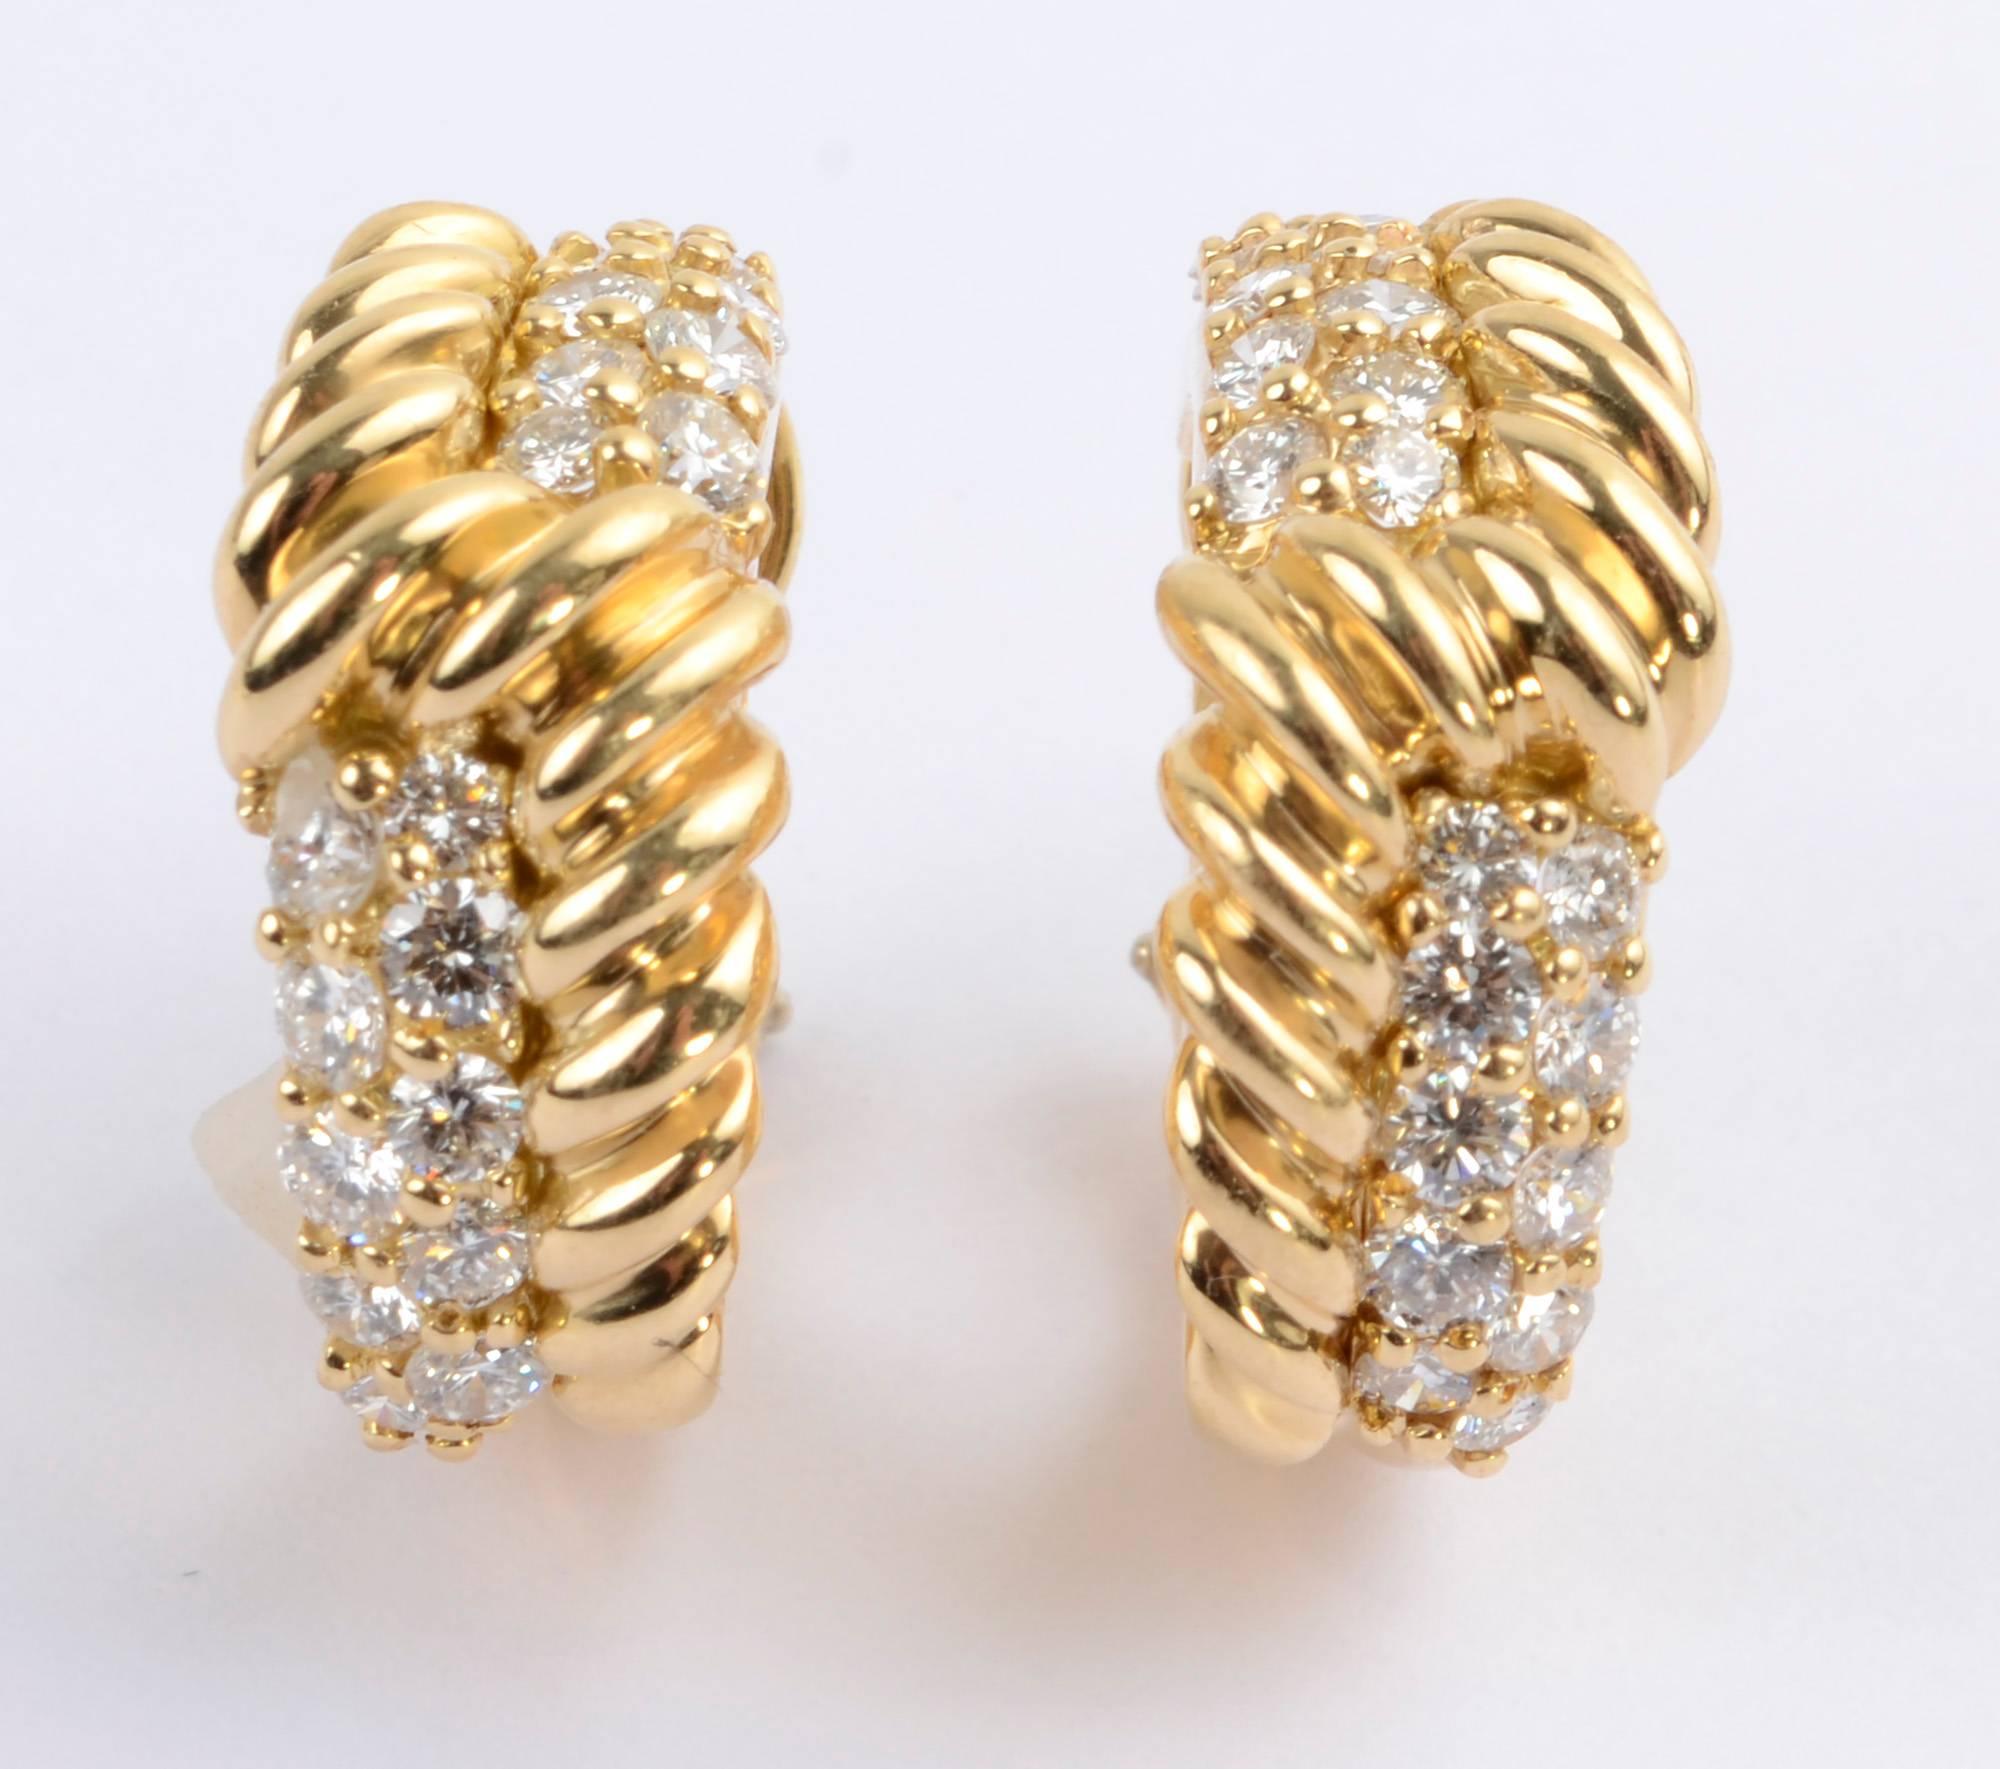 Hammerman Brothers hoop earrings with twisted gold and approximately 1.6 carats of round brilliant cut diamonds. An interesting design alternates the placement of the gold with diamonds between. Clip backs can be converted to posts.